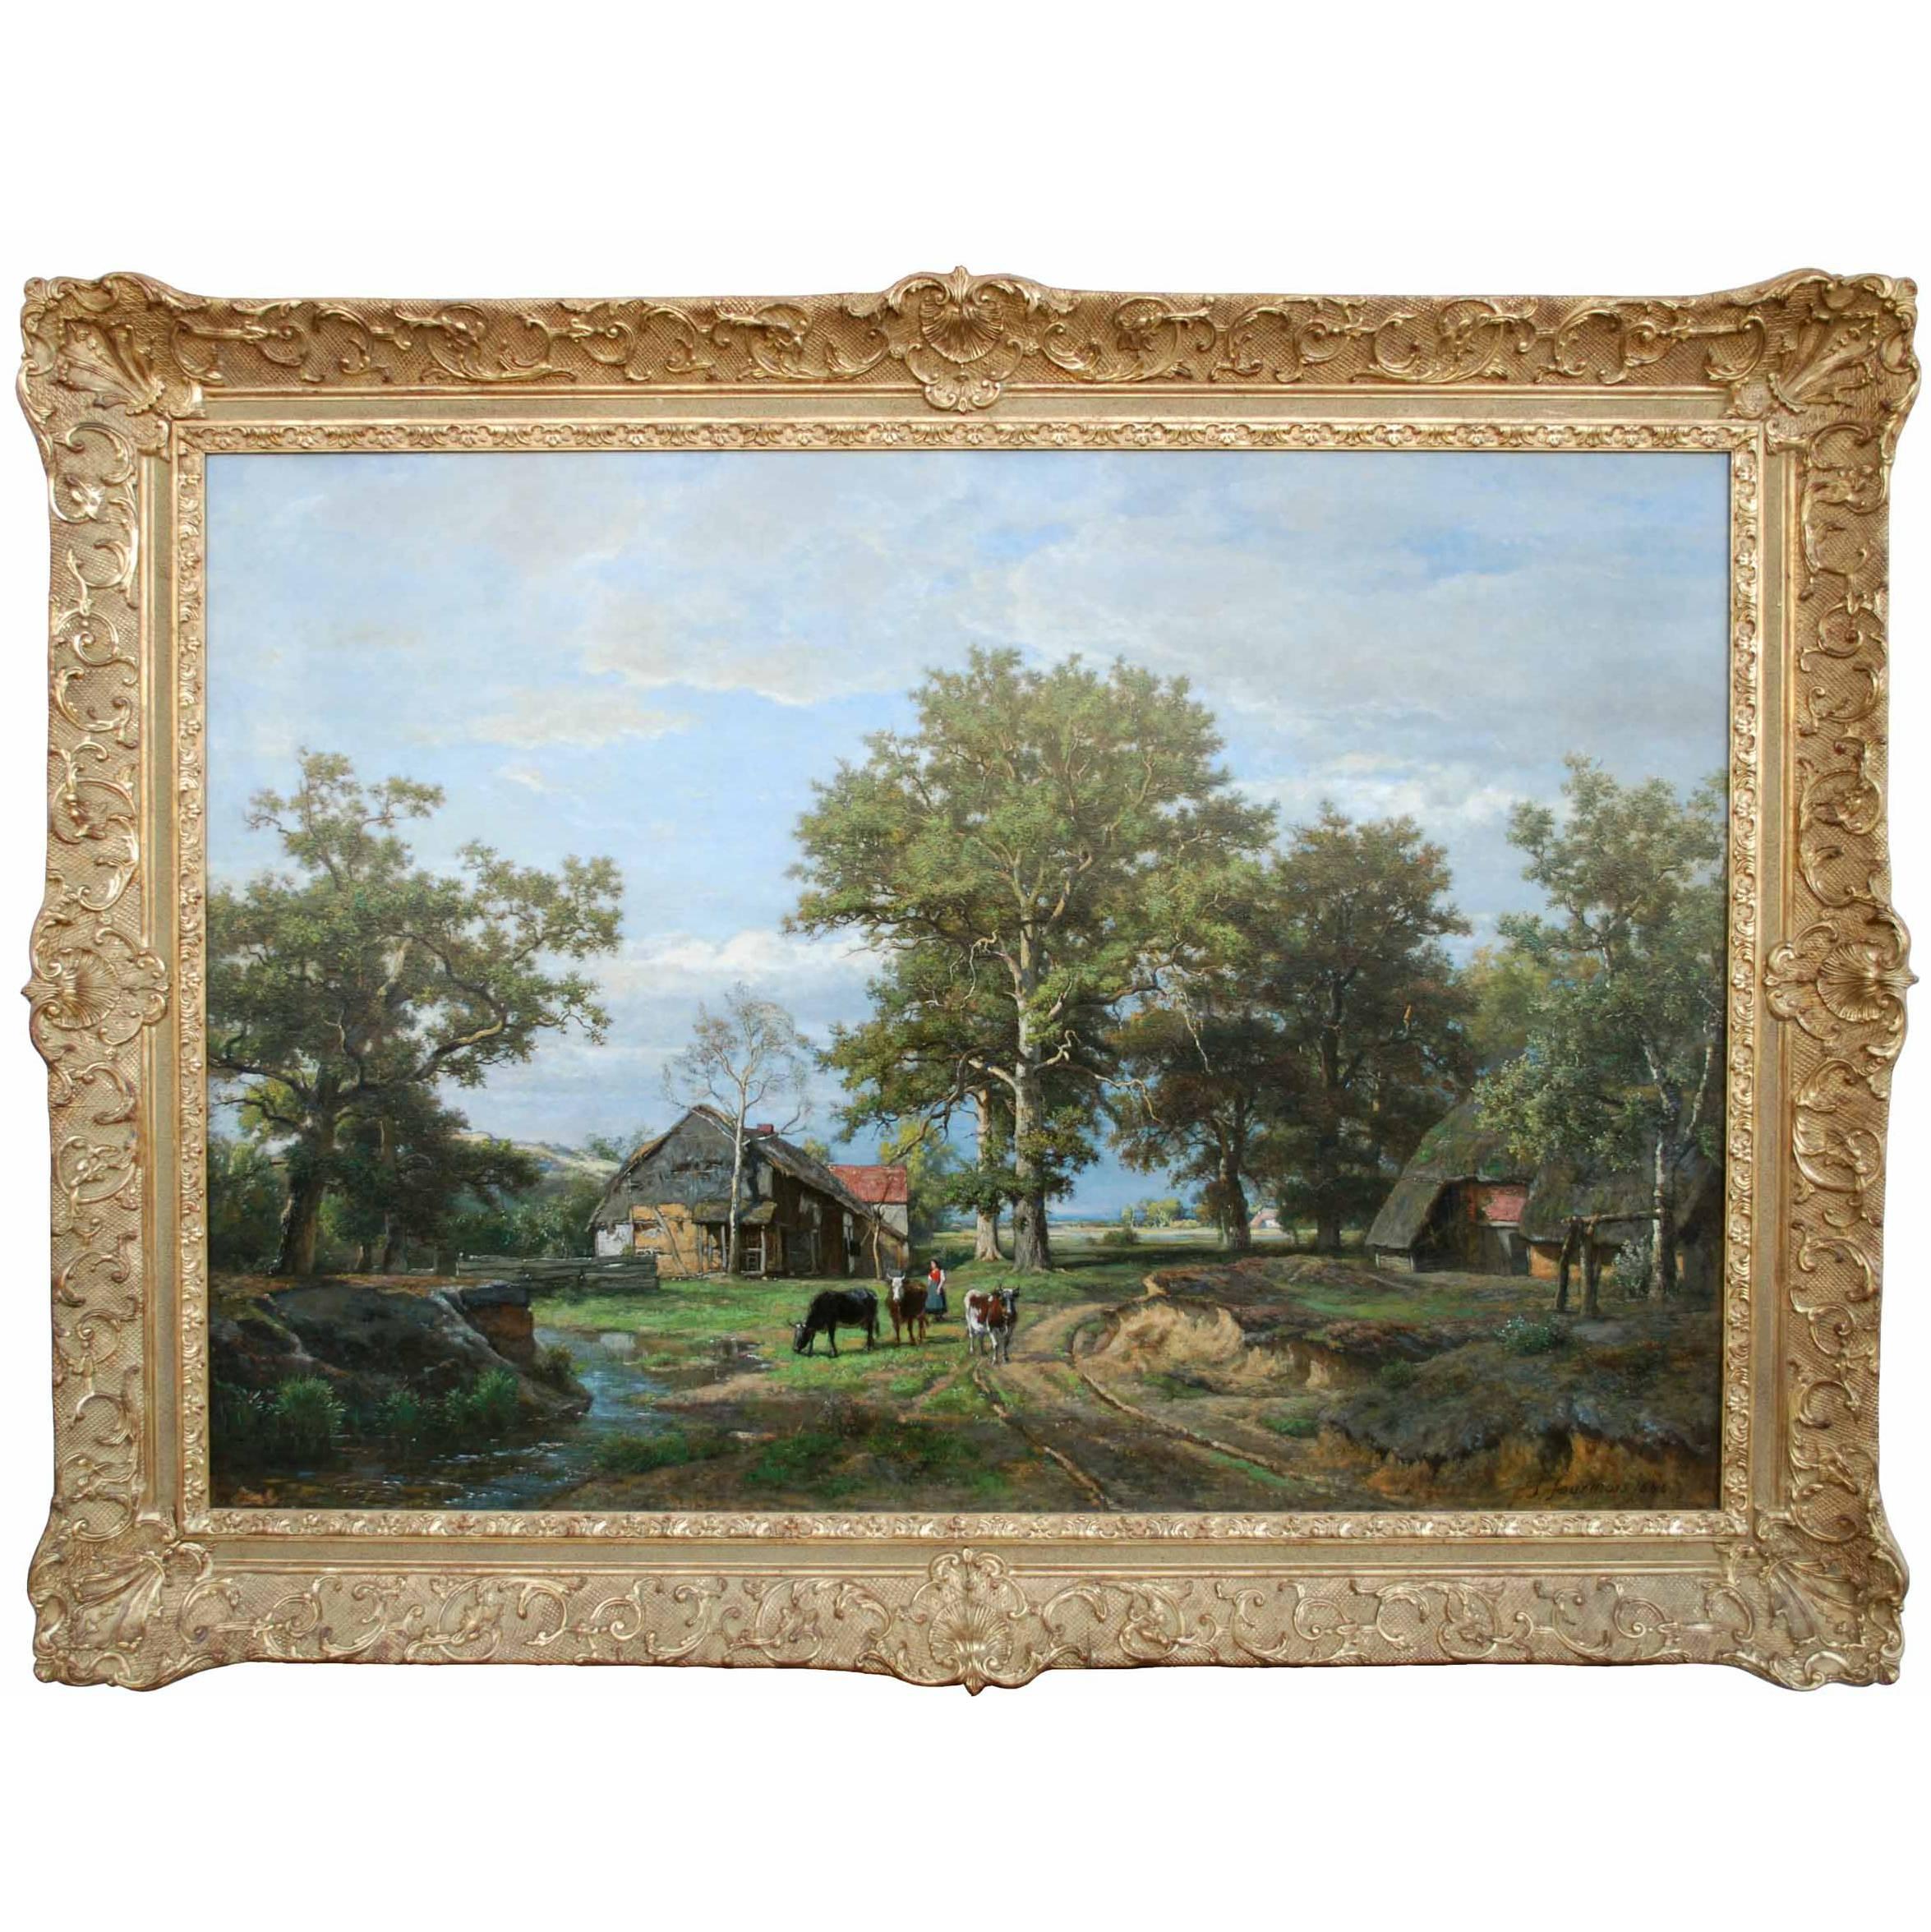 'Life on the Farm' 1866 Oil on Canvas Landscape Painting by Theodore Fourmois